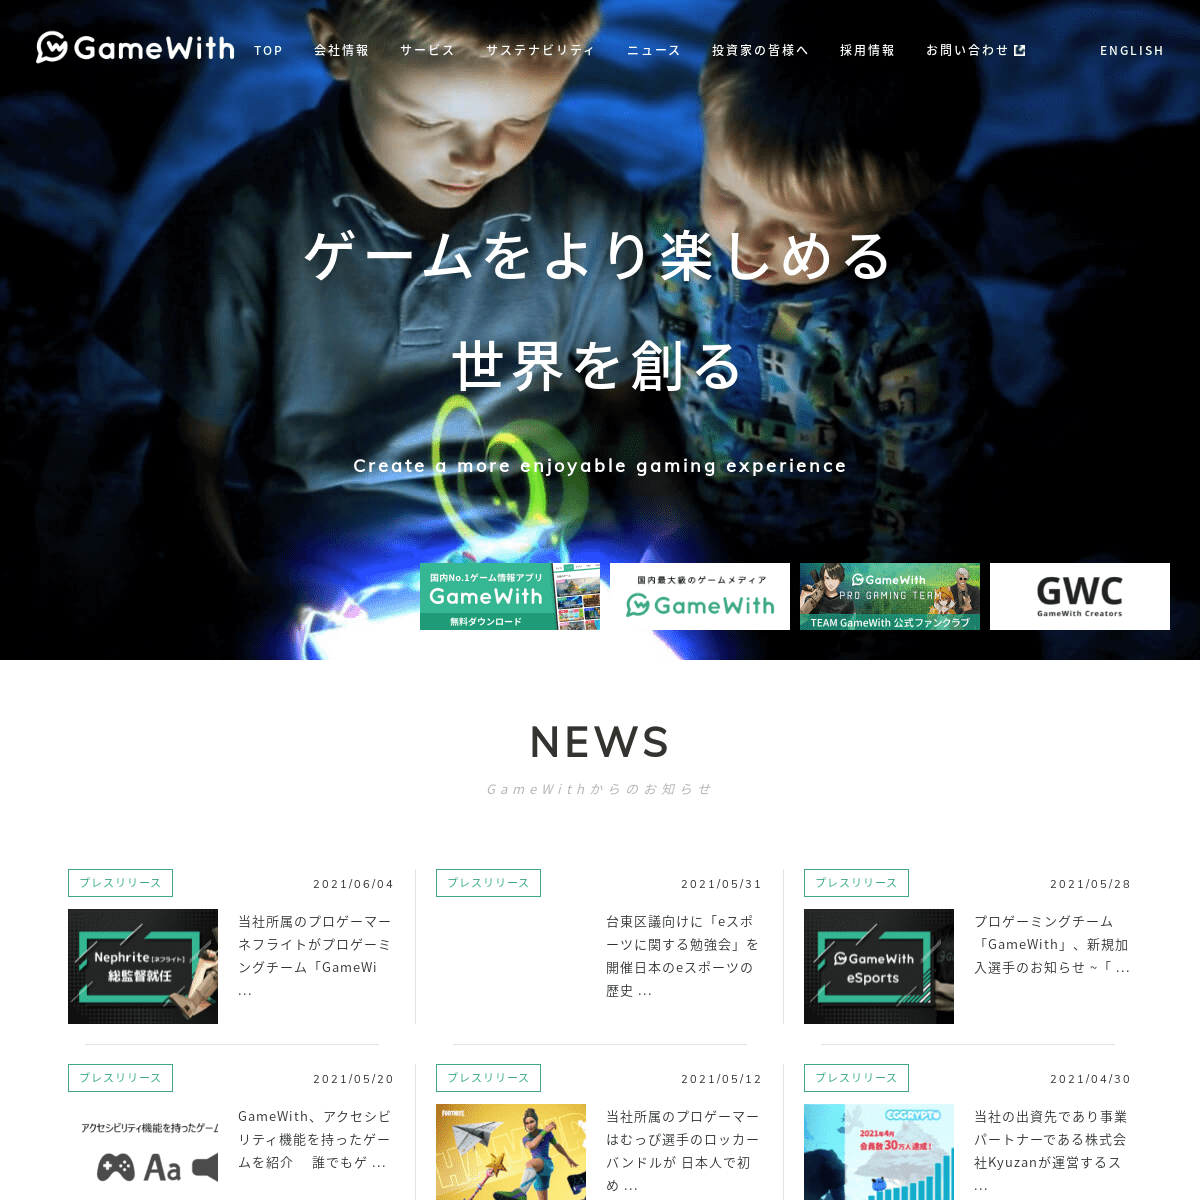 A complete backup of https://gamewith.co.jp